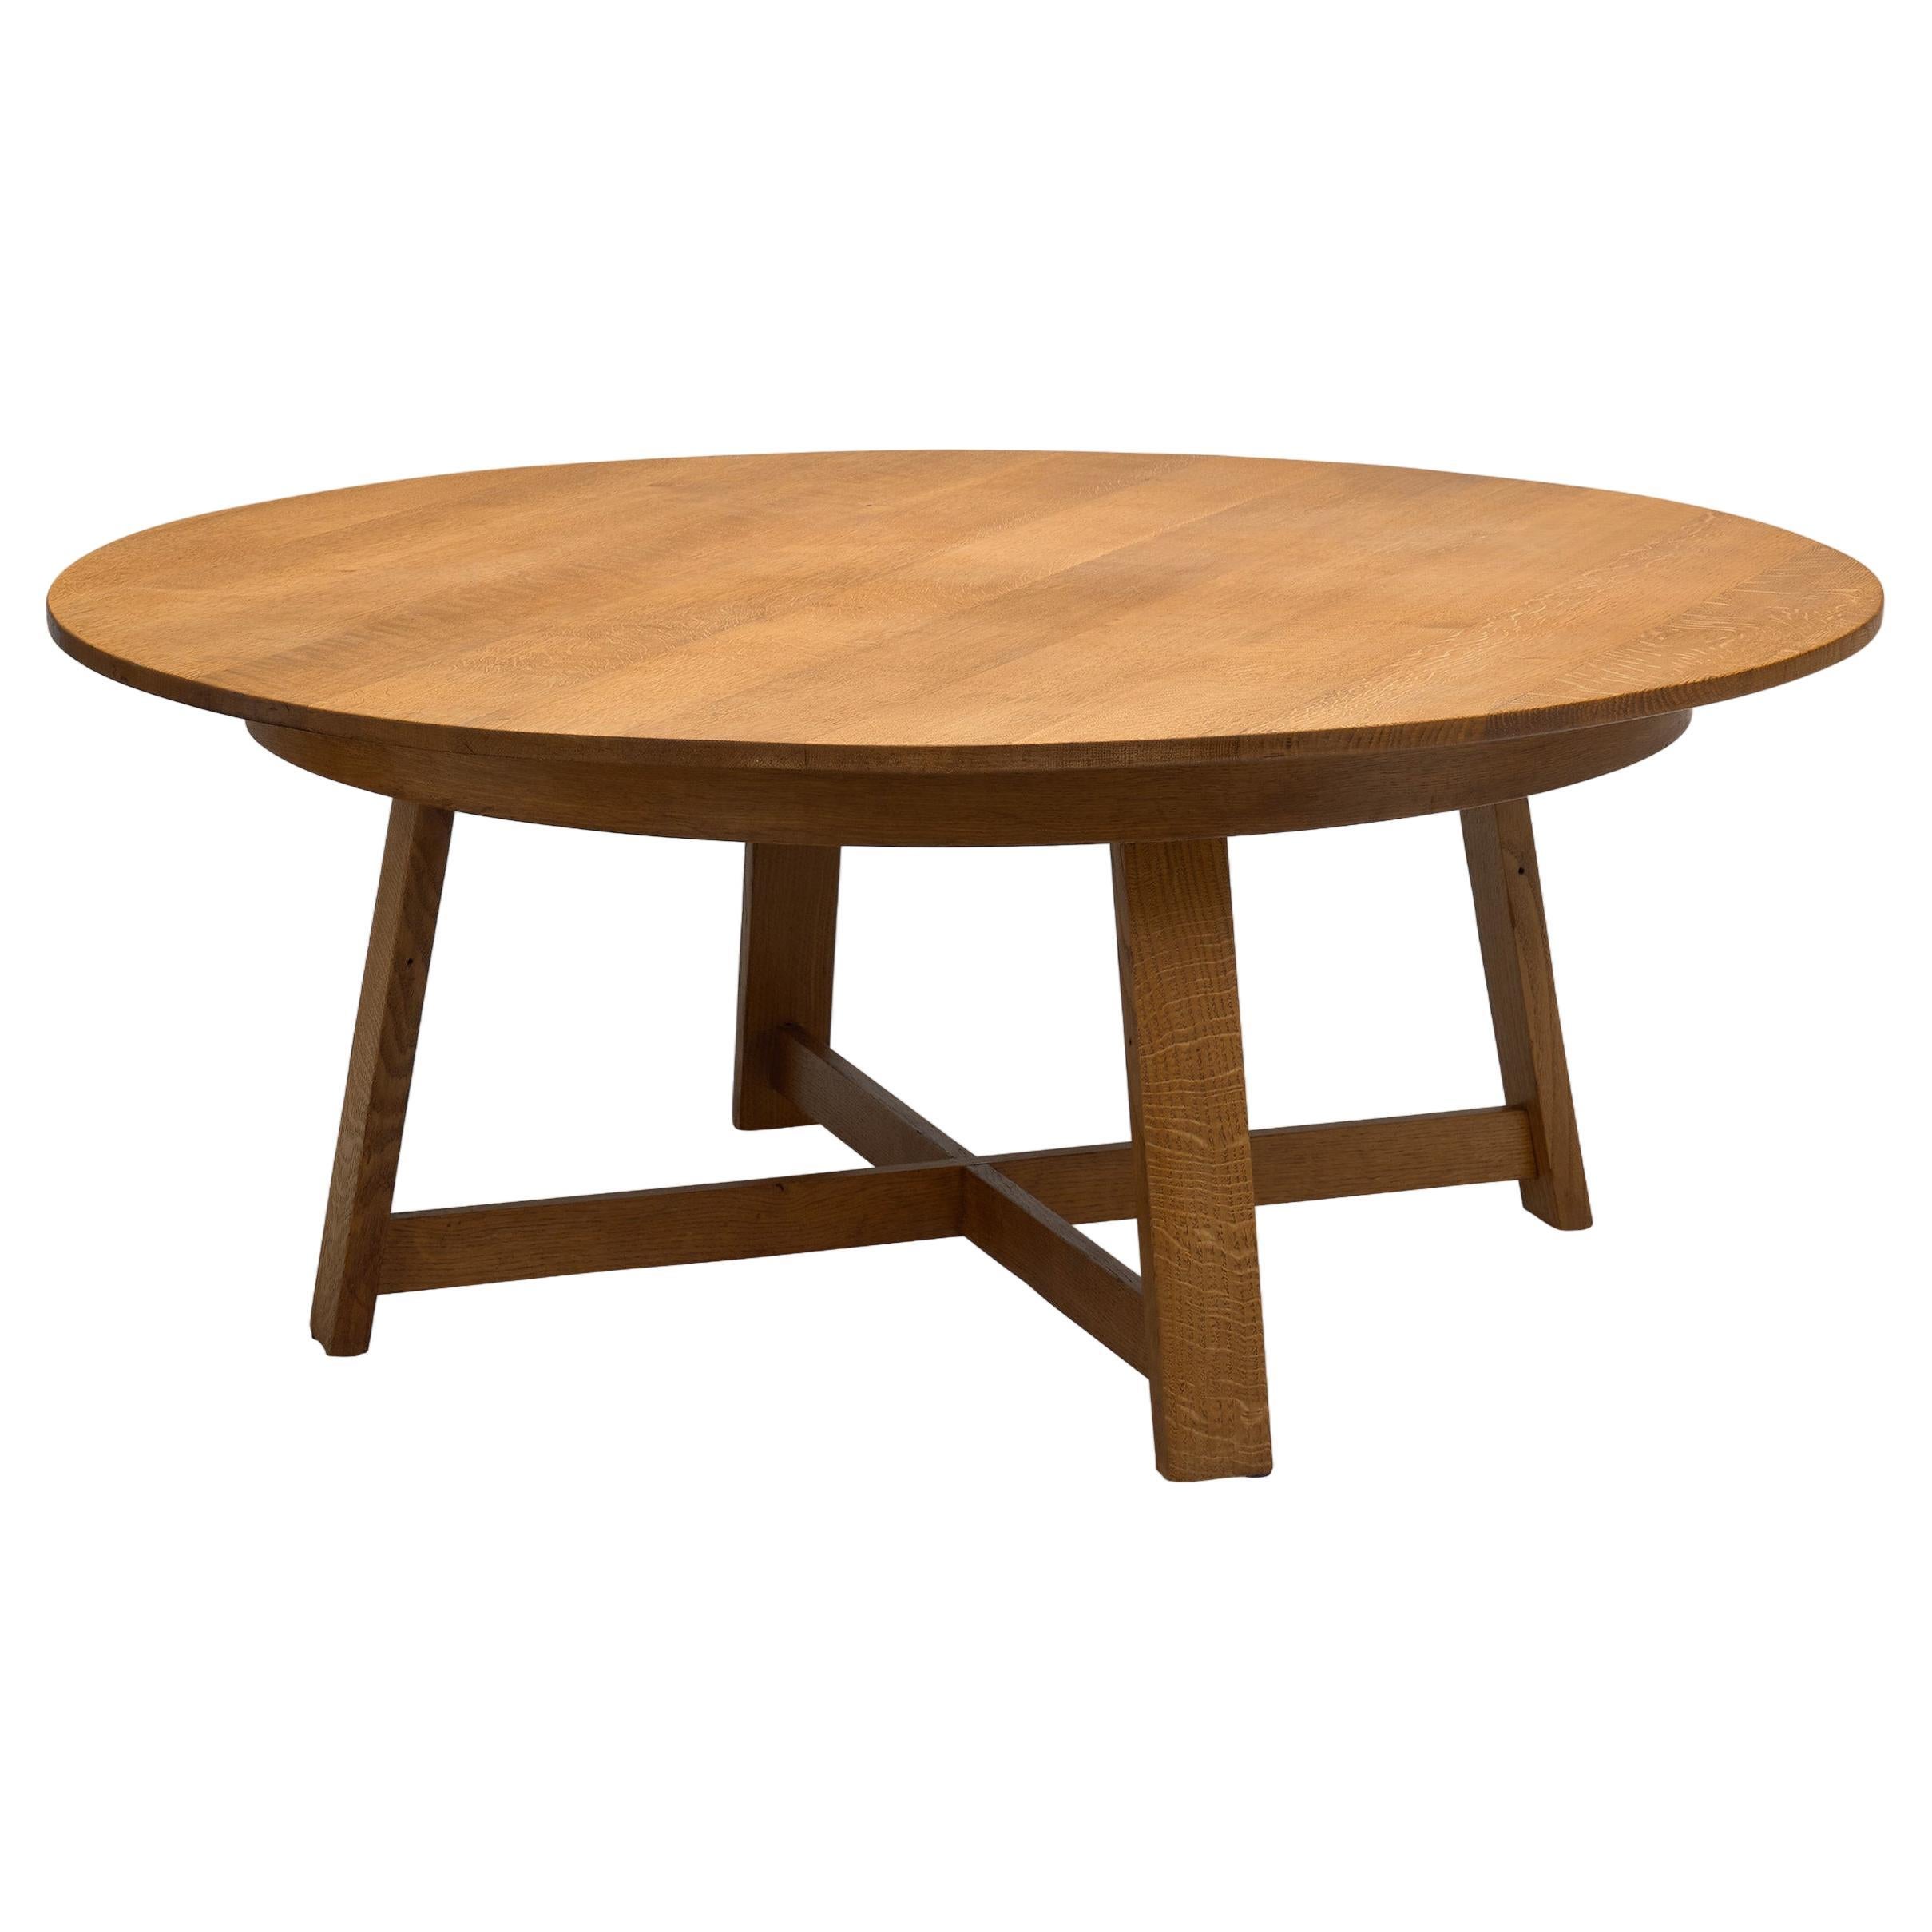 Circular Solid Wood Table with Cross Stretchers, Europe ca 1960s For Sale